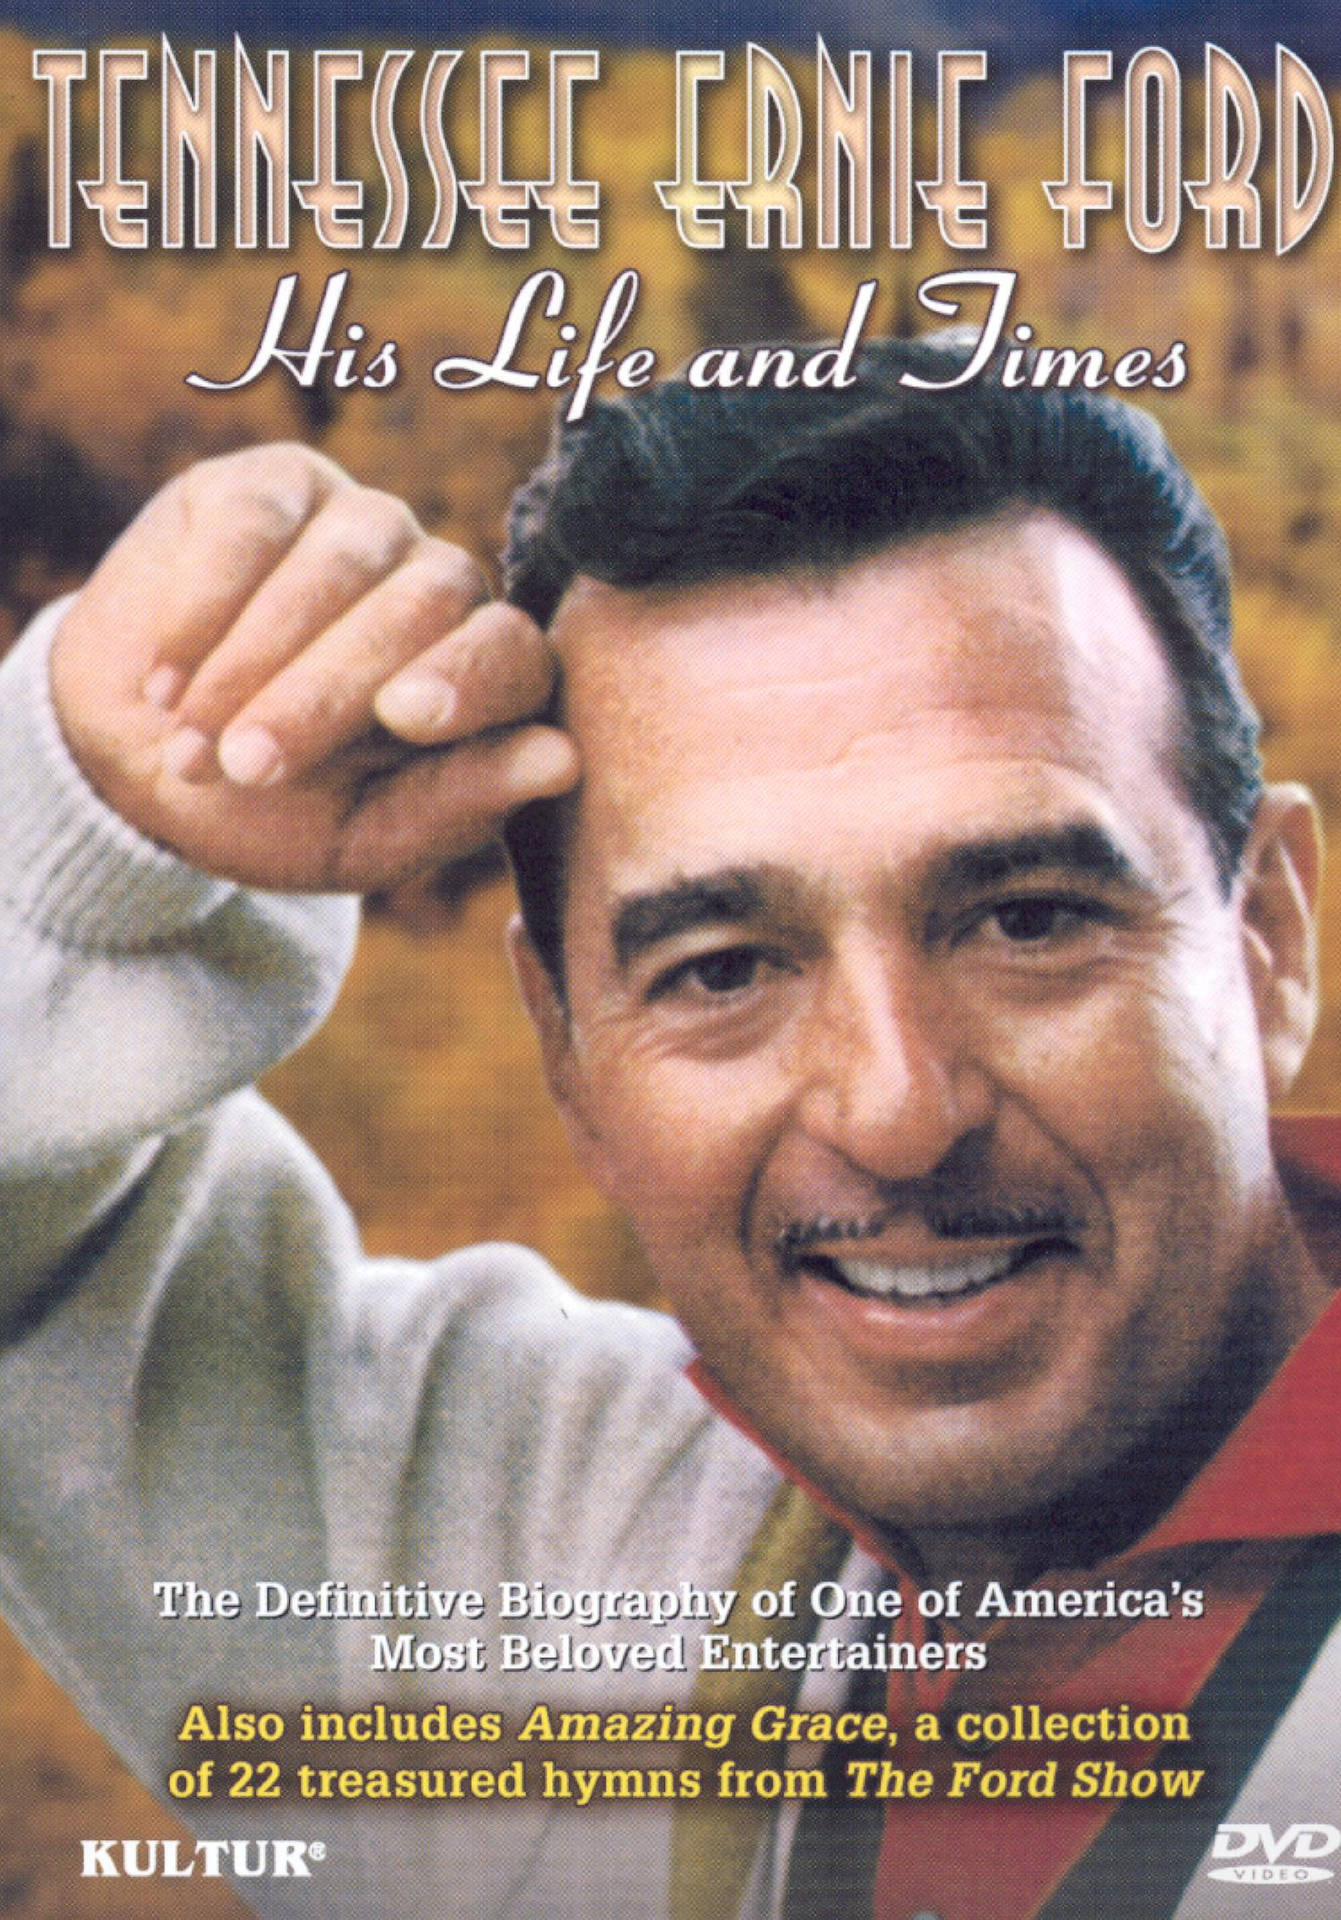 Tennessee Ernie Ford His Life And Times Documentary Poster Wallpaper